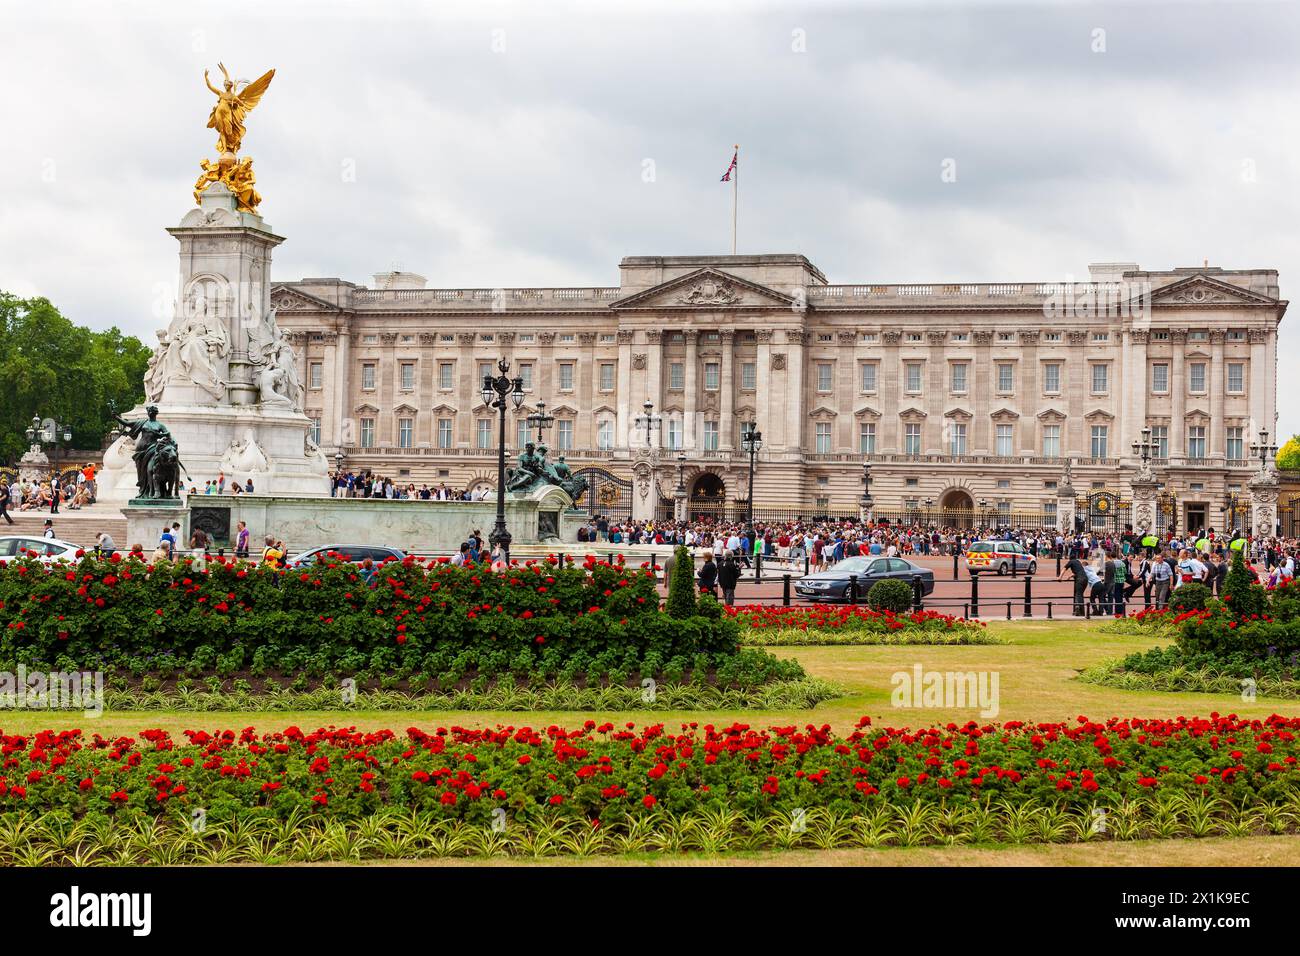 London, United Kingdom - June 29, 2010 : Buckingham Palace. Crowds flock to the gate around Buckingham Palace hoping to catch a glimpse of a Royal. Stock Photo